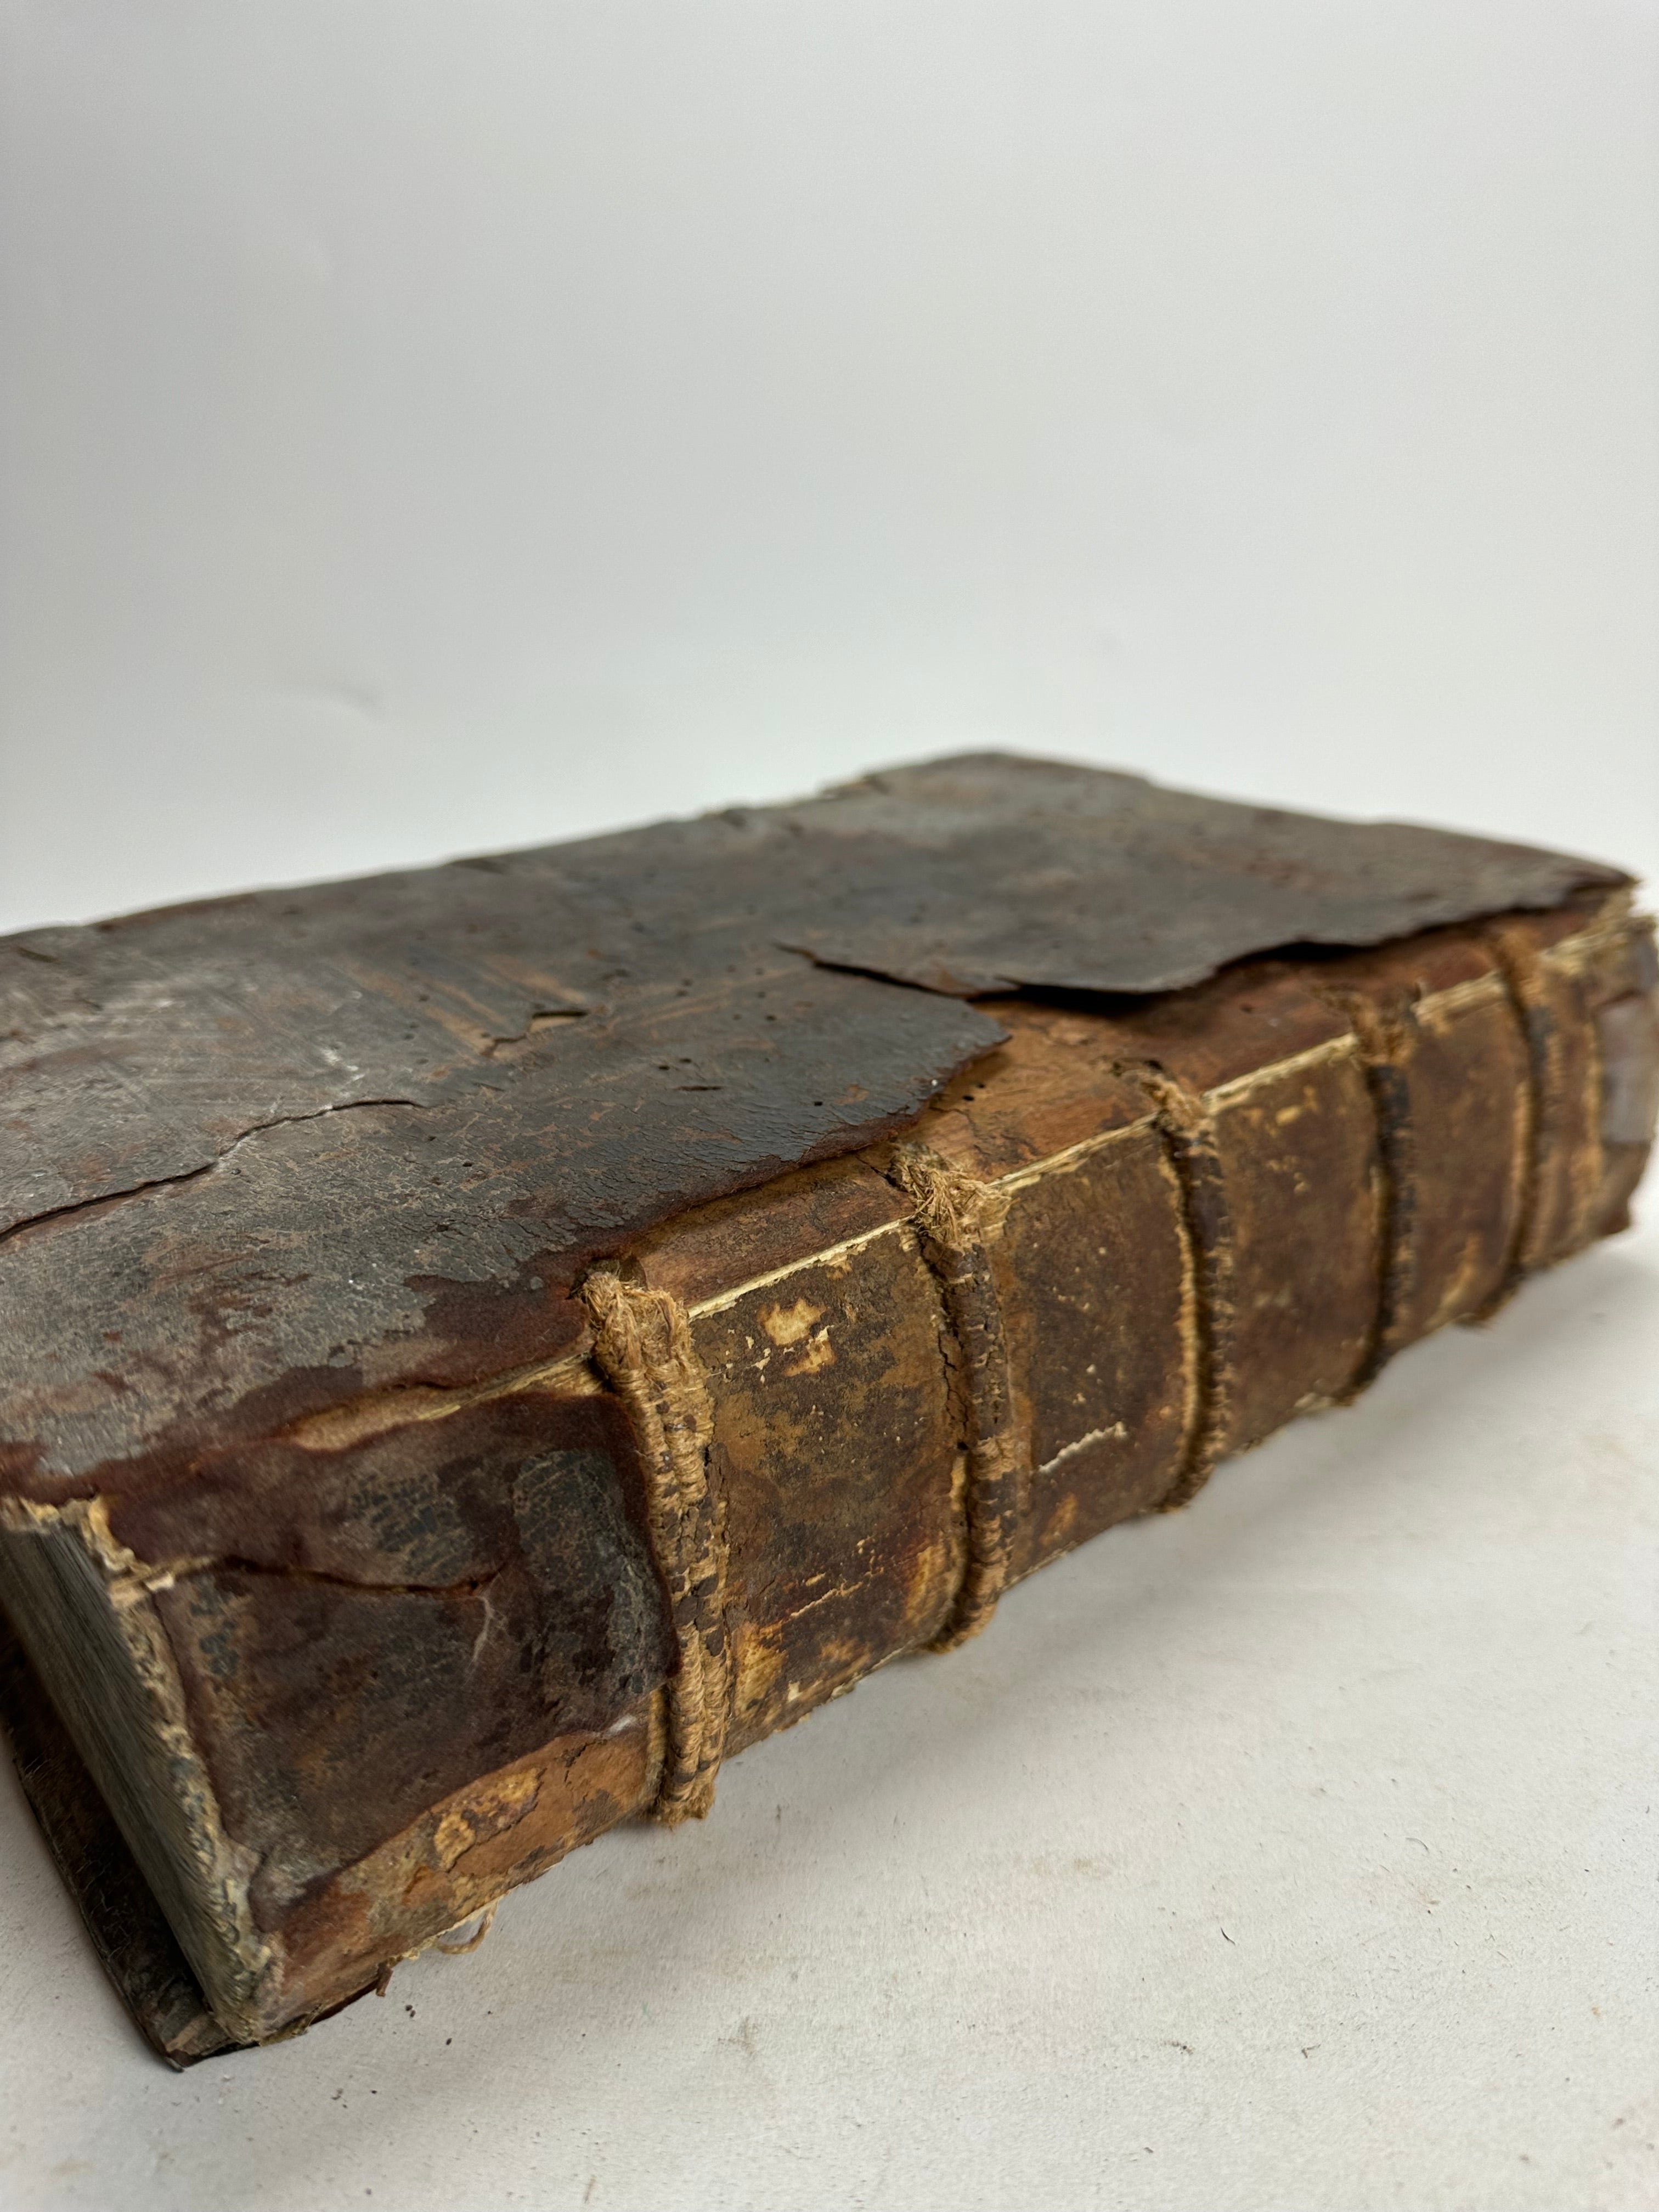 1700s Leather Book